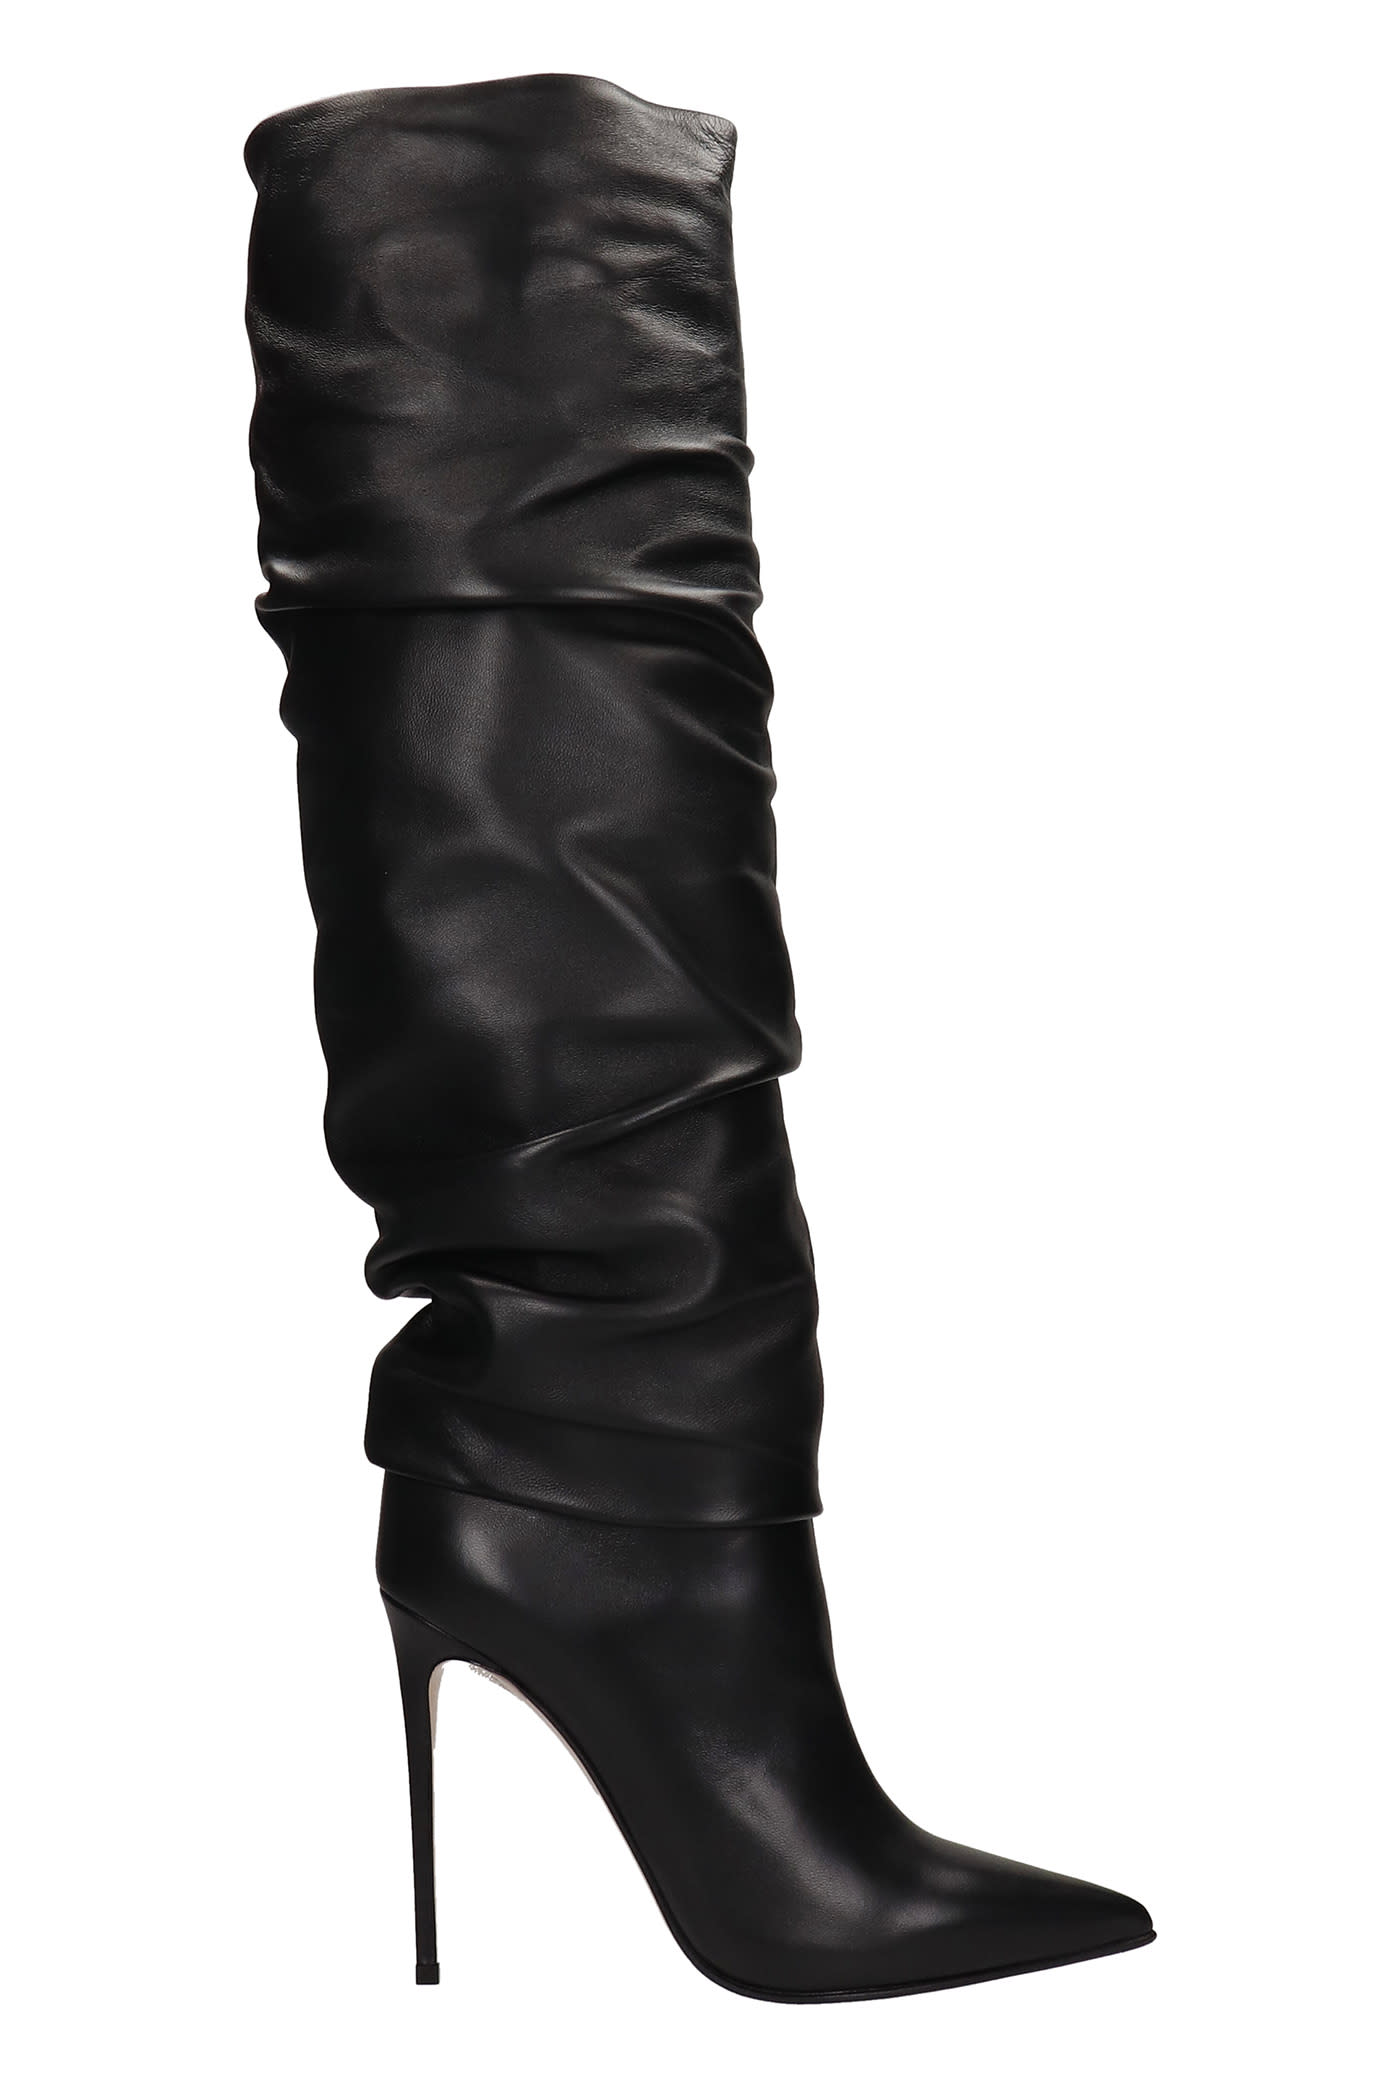 Le Silla Eva High Heels Boots In Black Leather